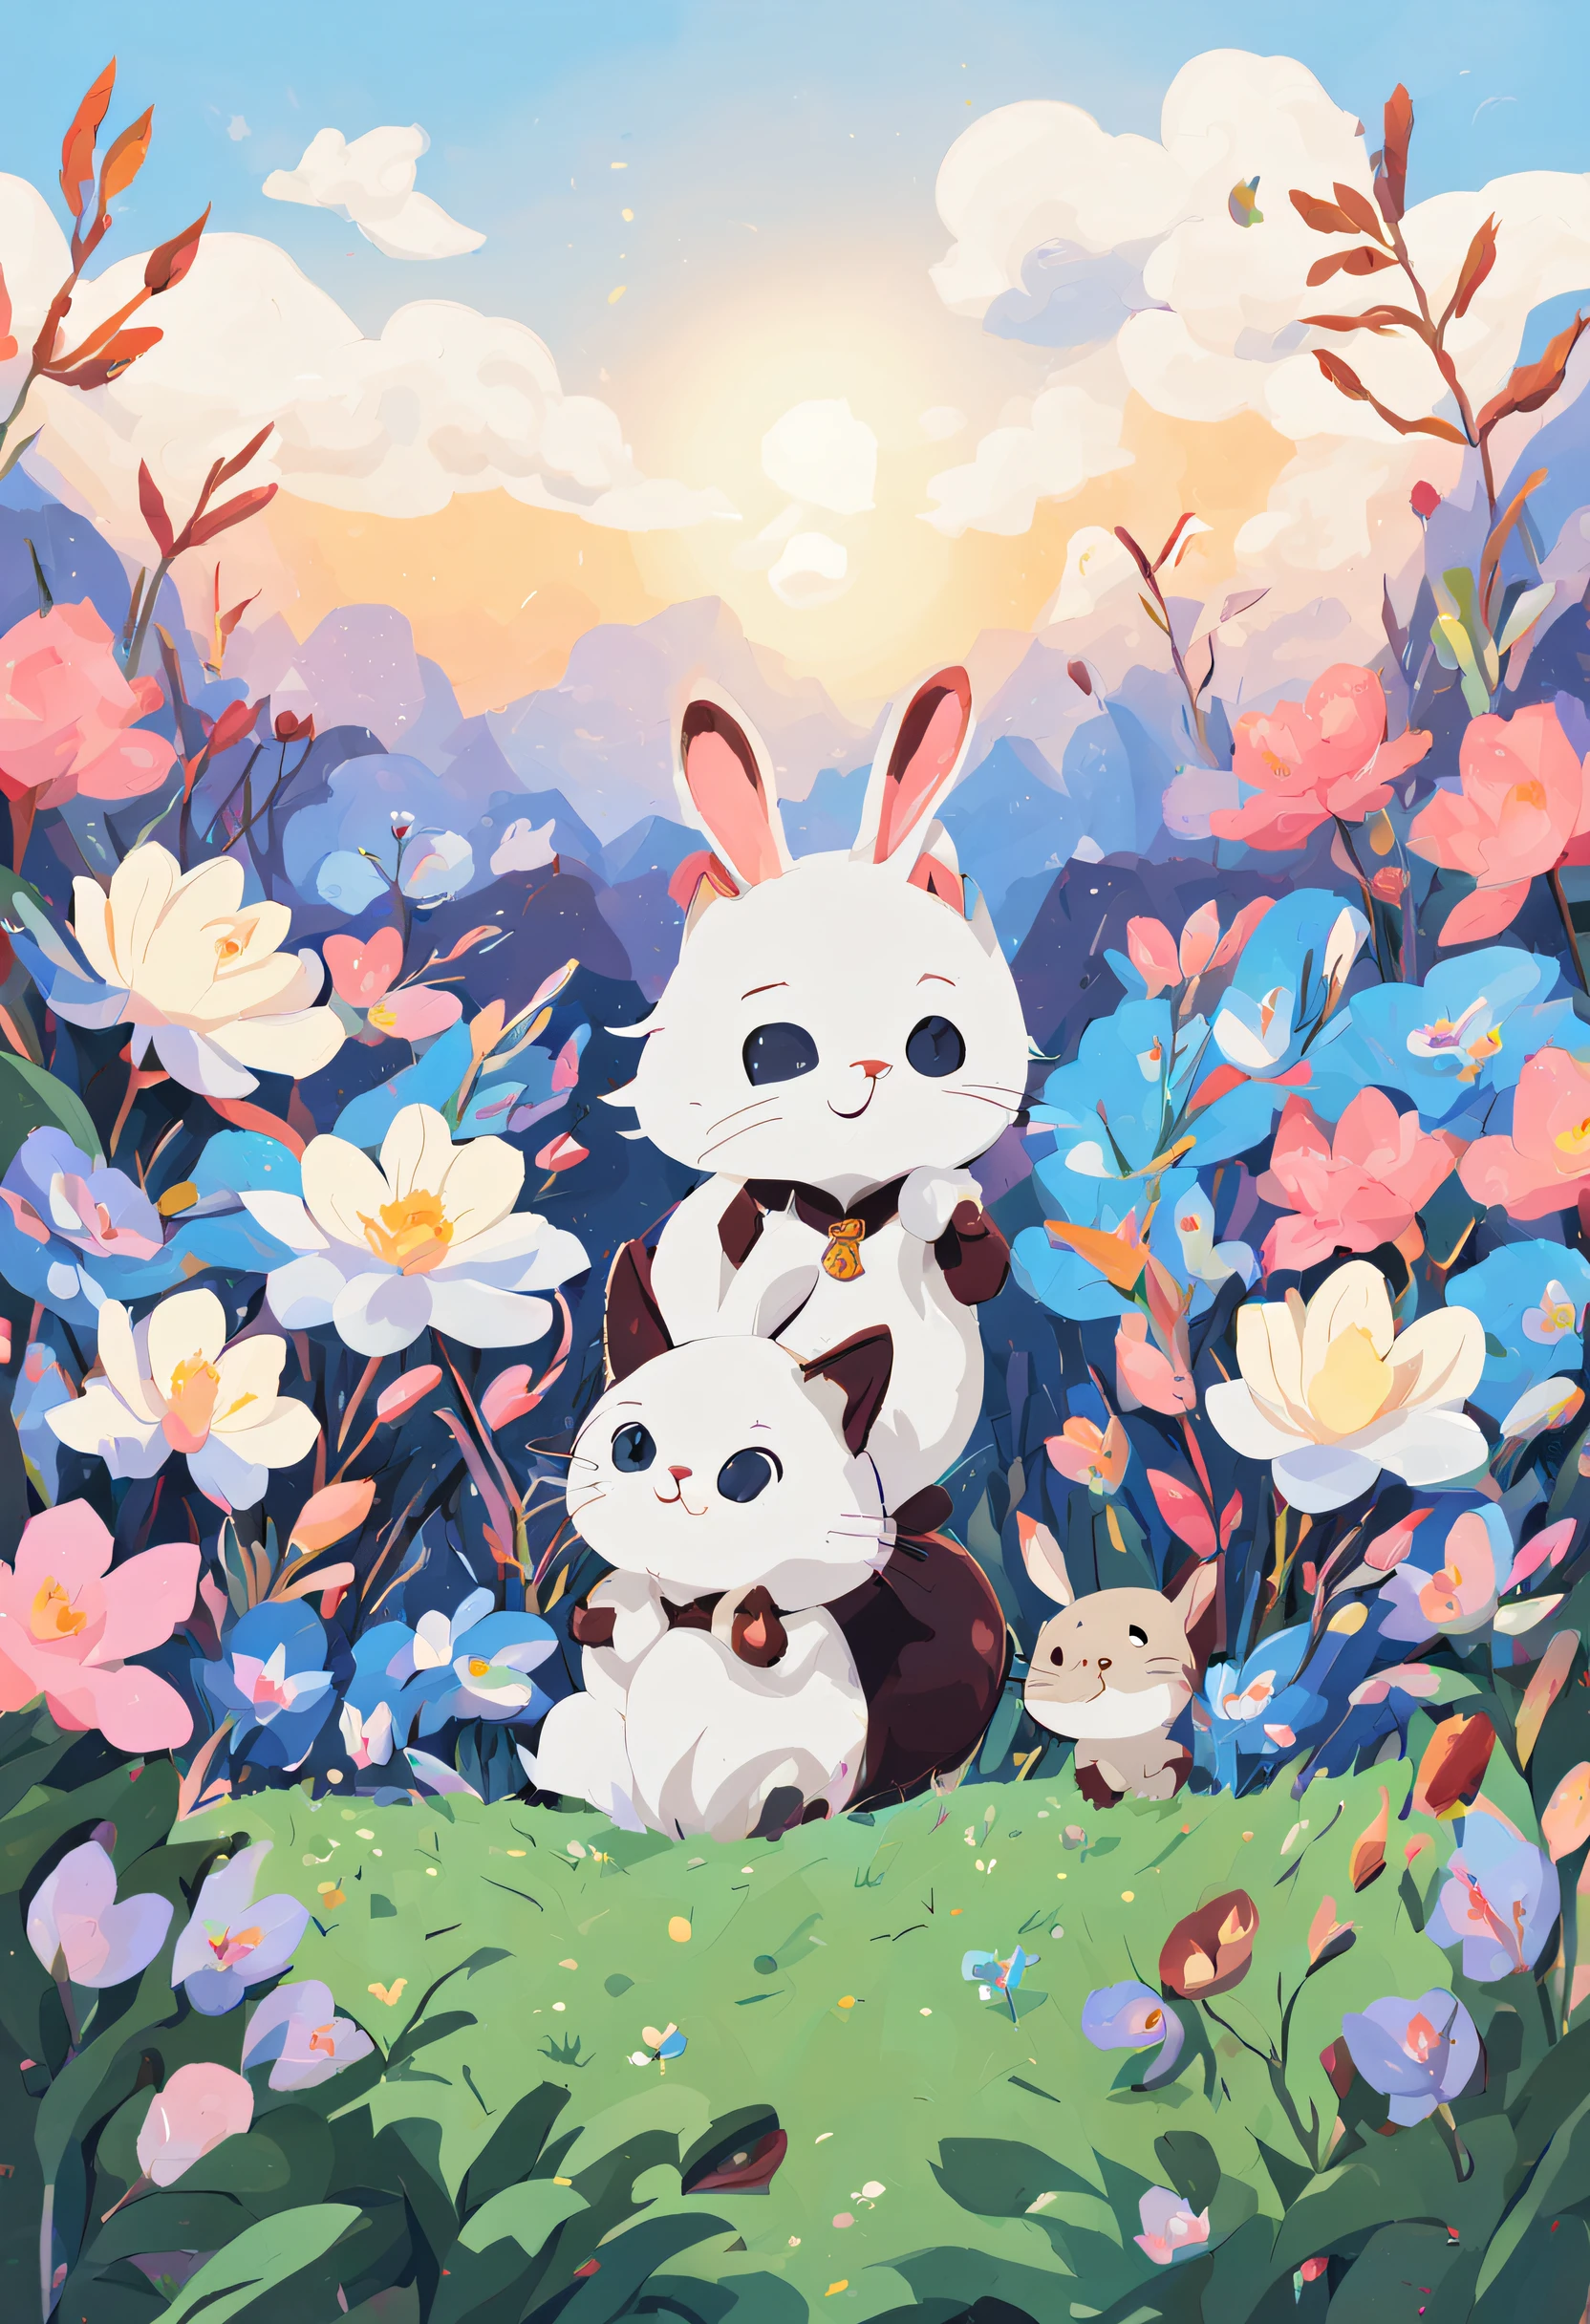 〈baby cat and baby rabbit〉chum、Pyonpyon、Nyan Nyan、The World of Picture Books、Gamine、Flower field psychedelic background、style of Laurie Greasley、Studio Ghibli、Akira Toriyama、James Girard、GenshinImpact、Trending pixiv fanbox、acrylic palette knife、4K、vivd colour、Devinart、Trending on ArtStation、Multiple poses and expressions with low detail